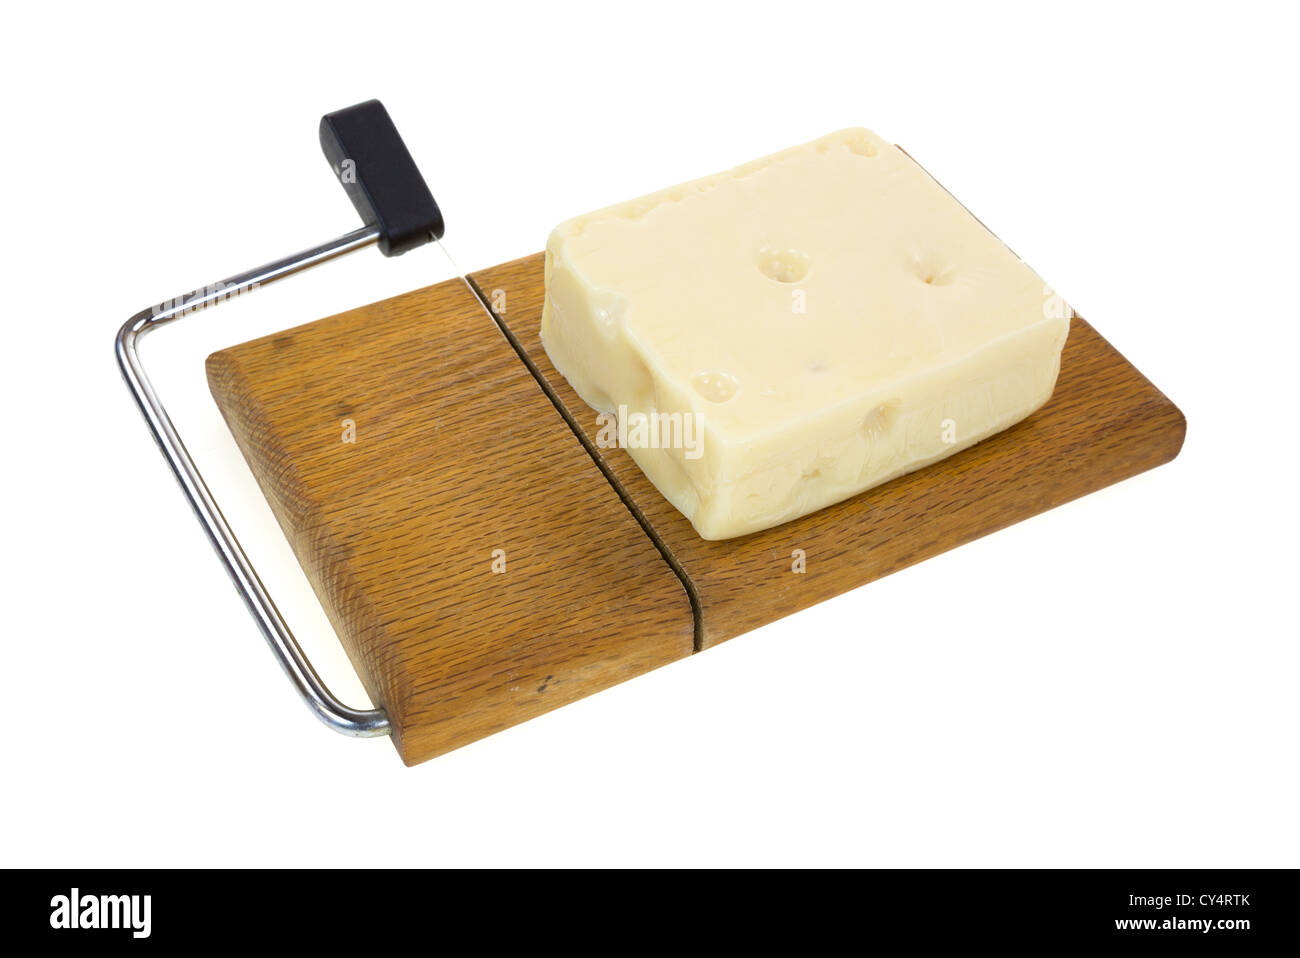 A block of aged Swiss cheese on an old wood cheese cutting board with wire and handle on a white background. Stock Photo